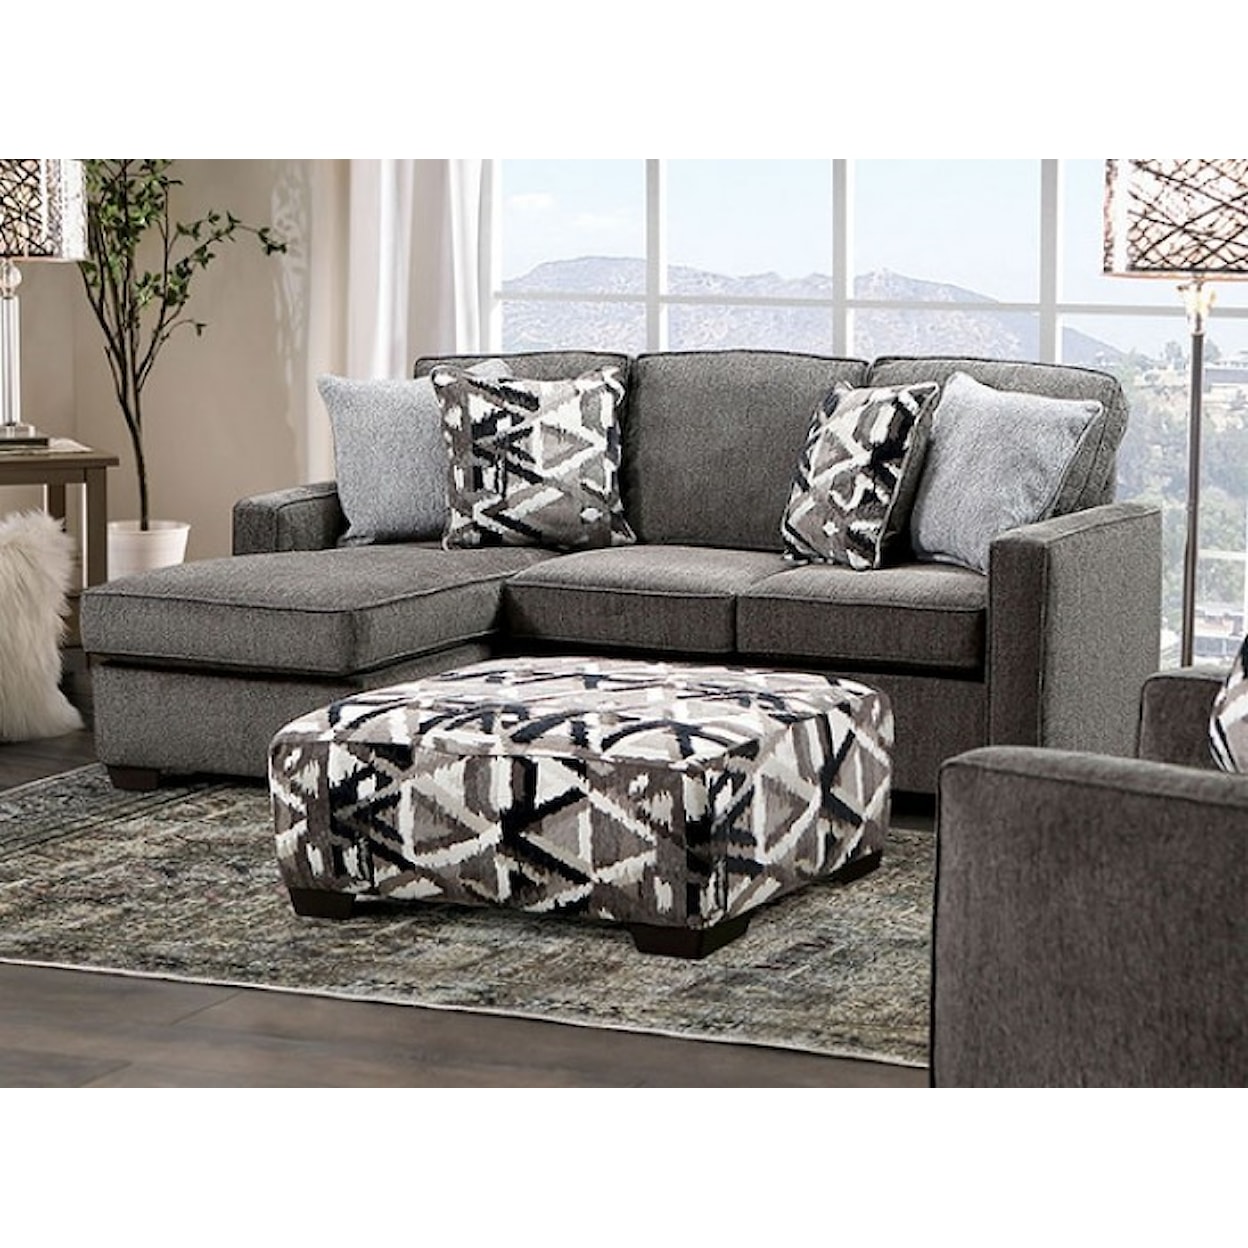 FUSA Brentwood Sofa Chaise